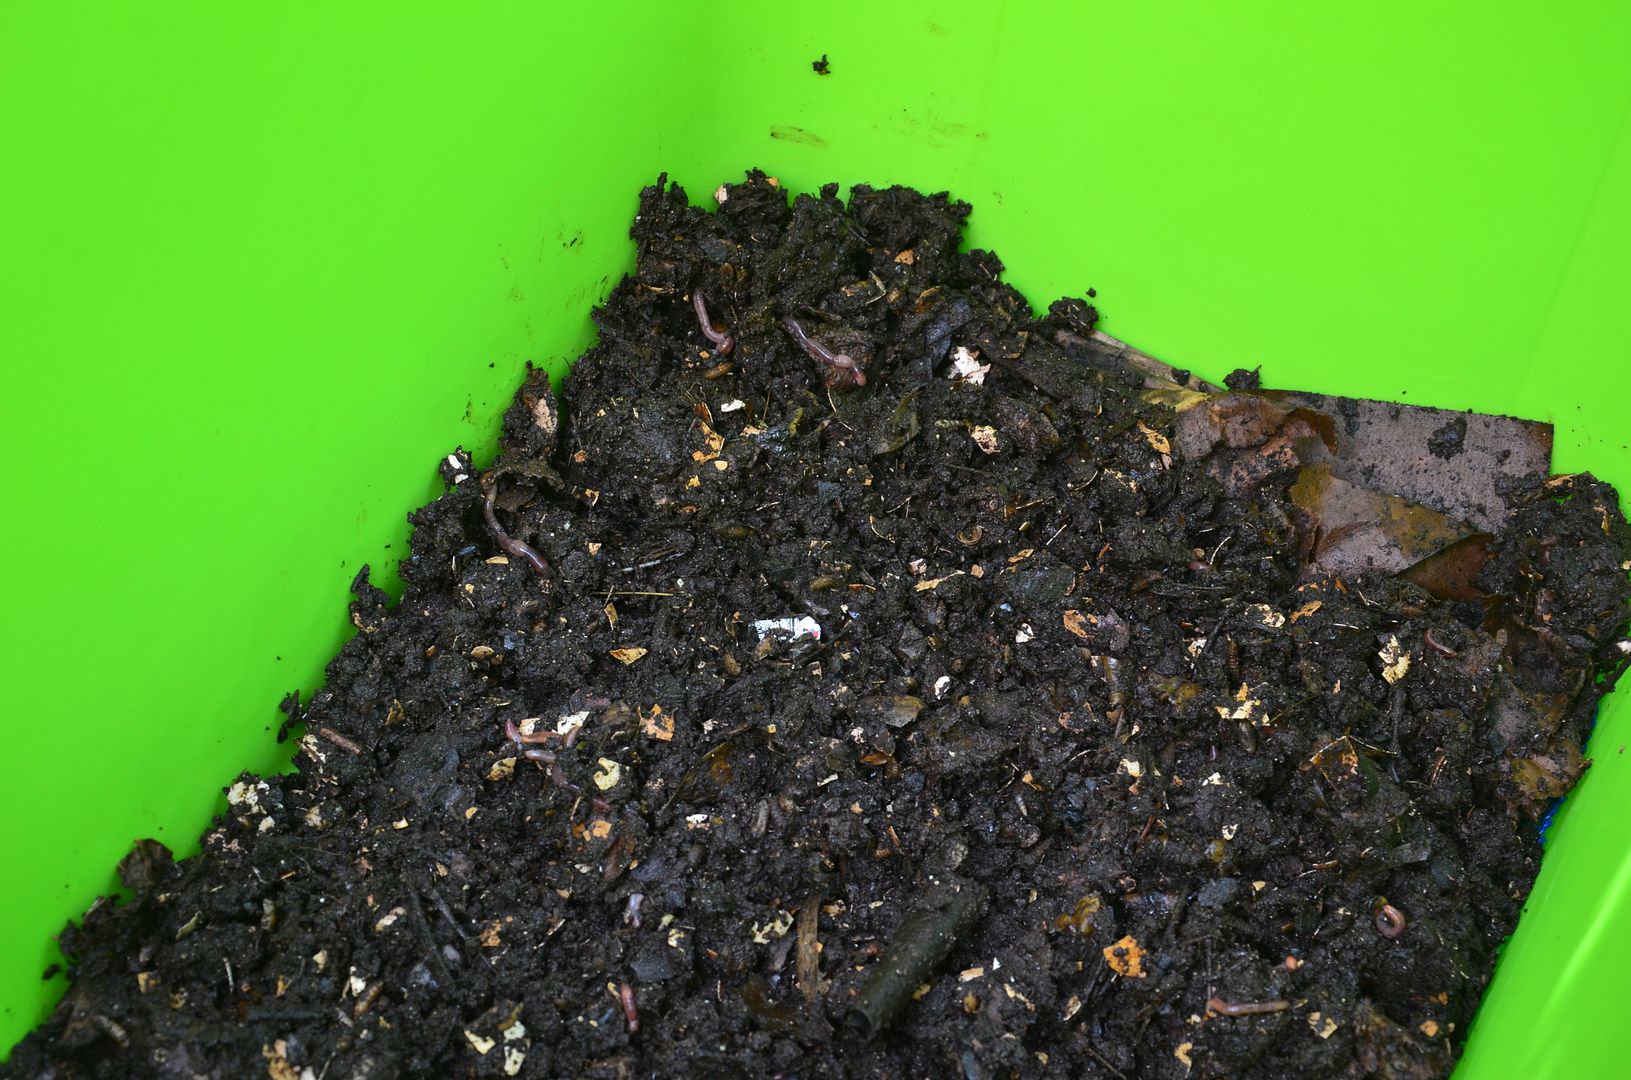 Vermicomposting in Mexico